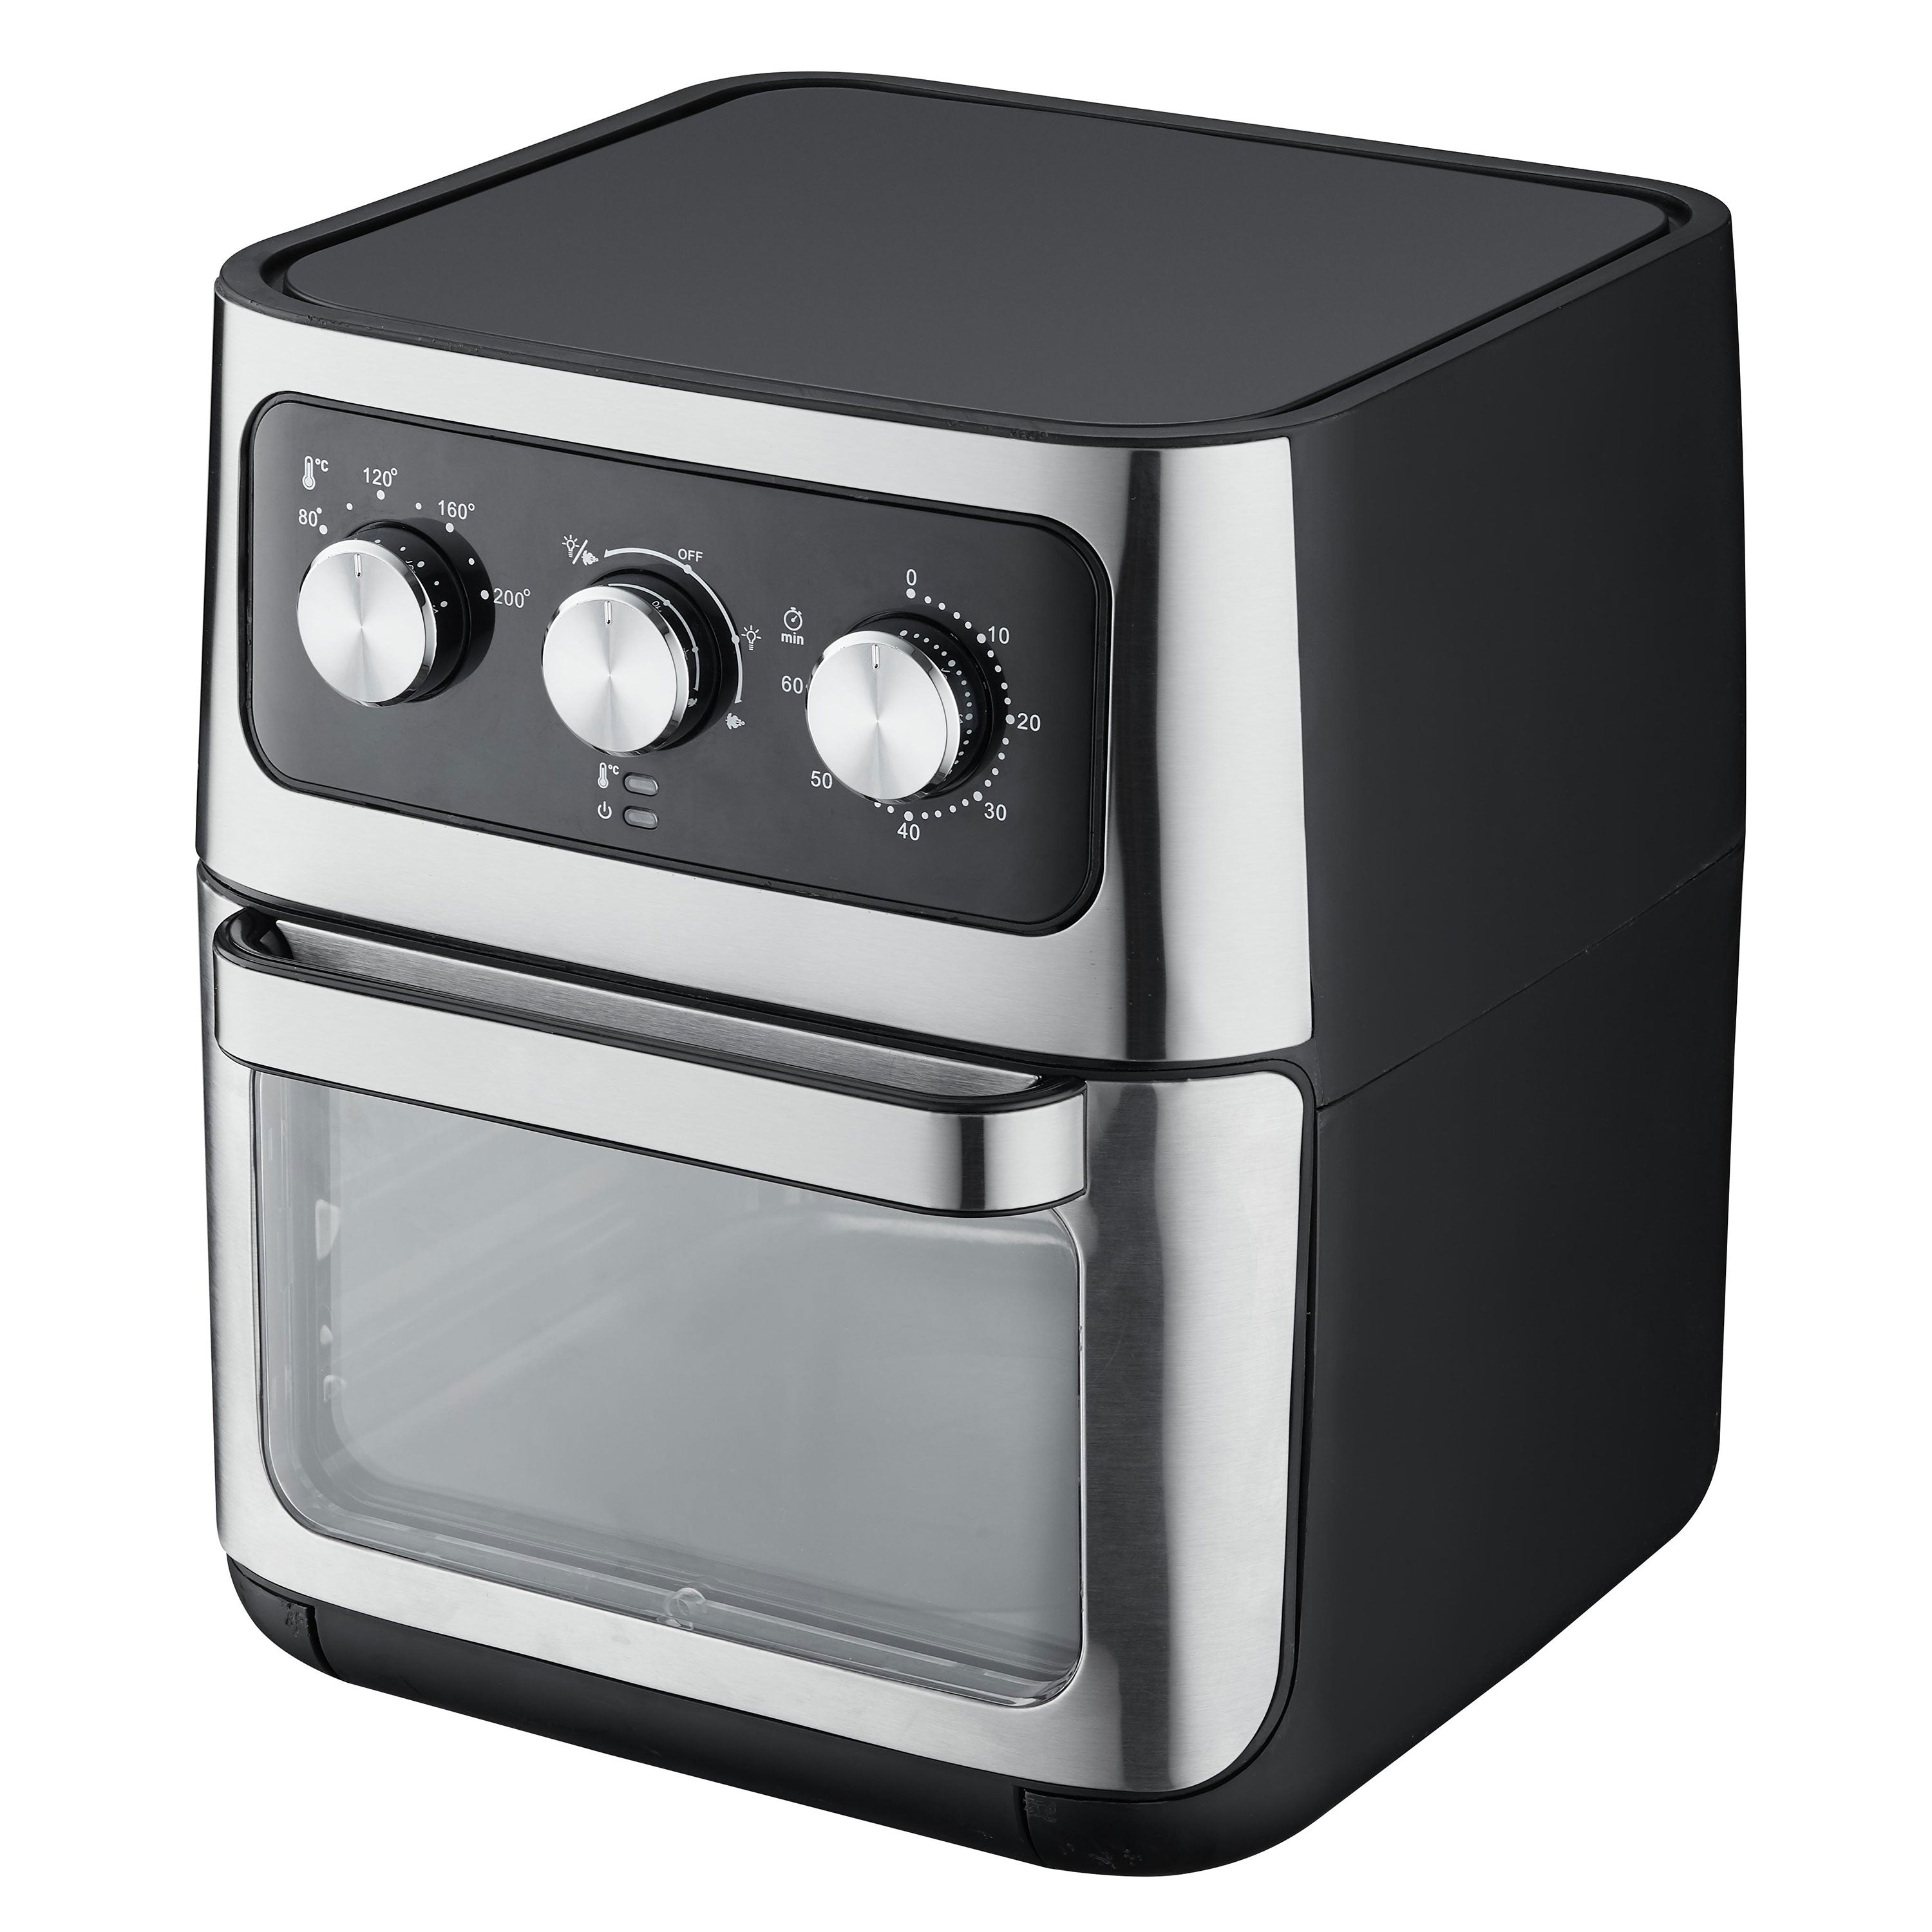 Daewoo Airfryer & Oven - DHFRYER12L